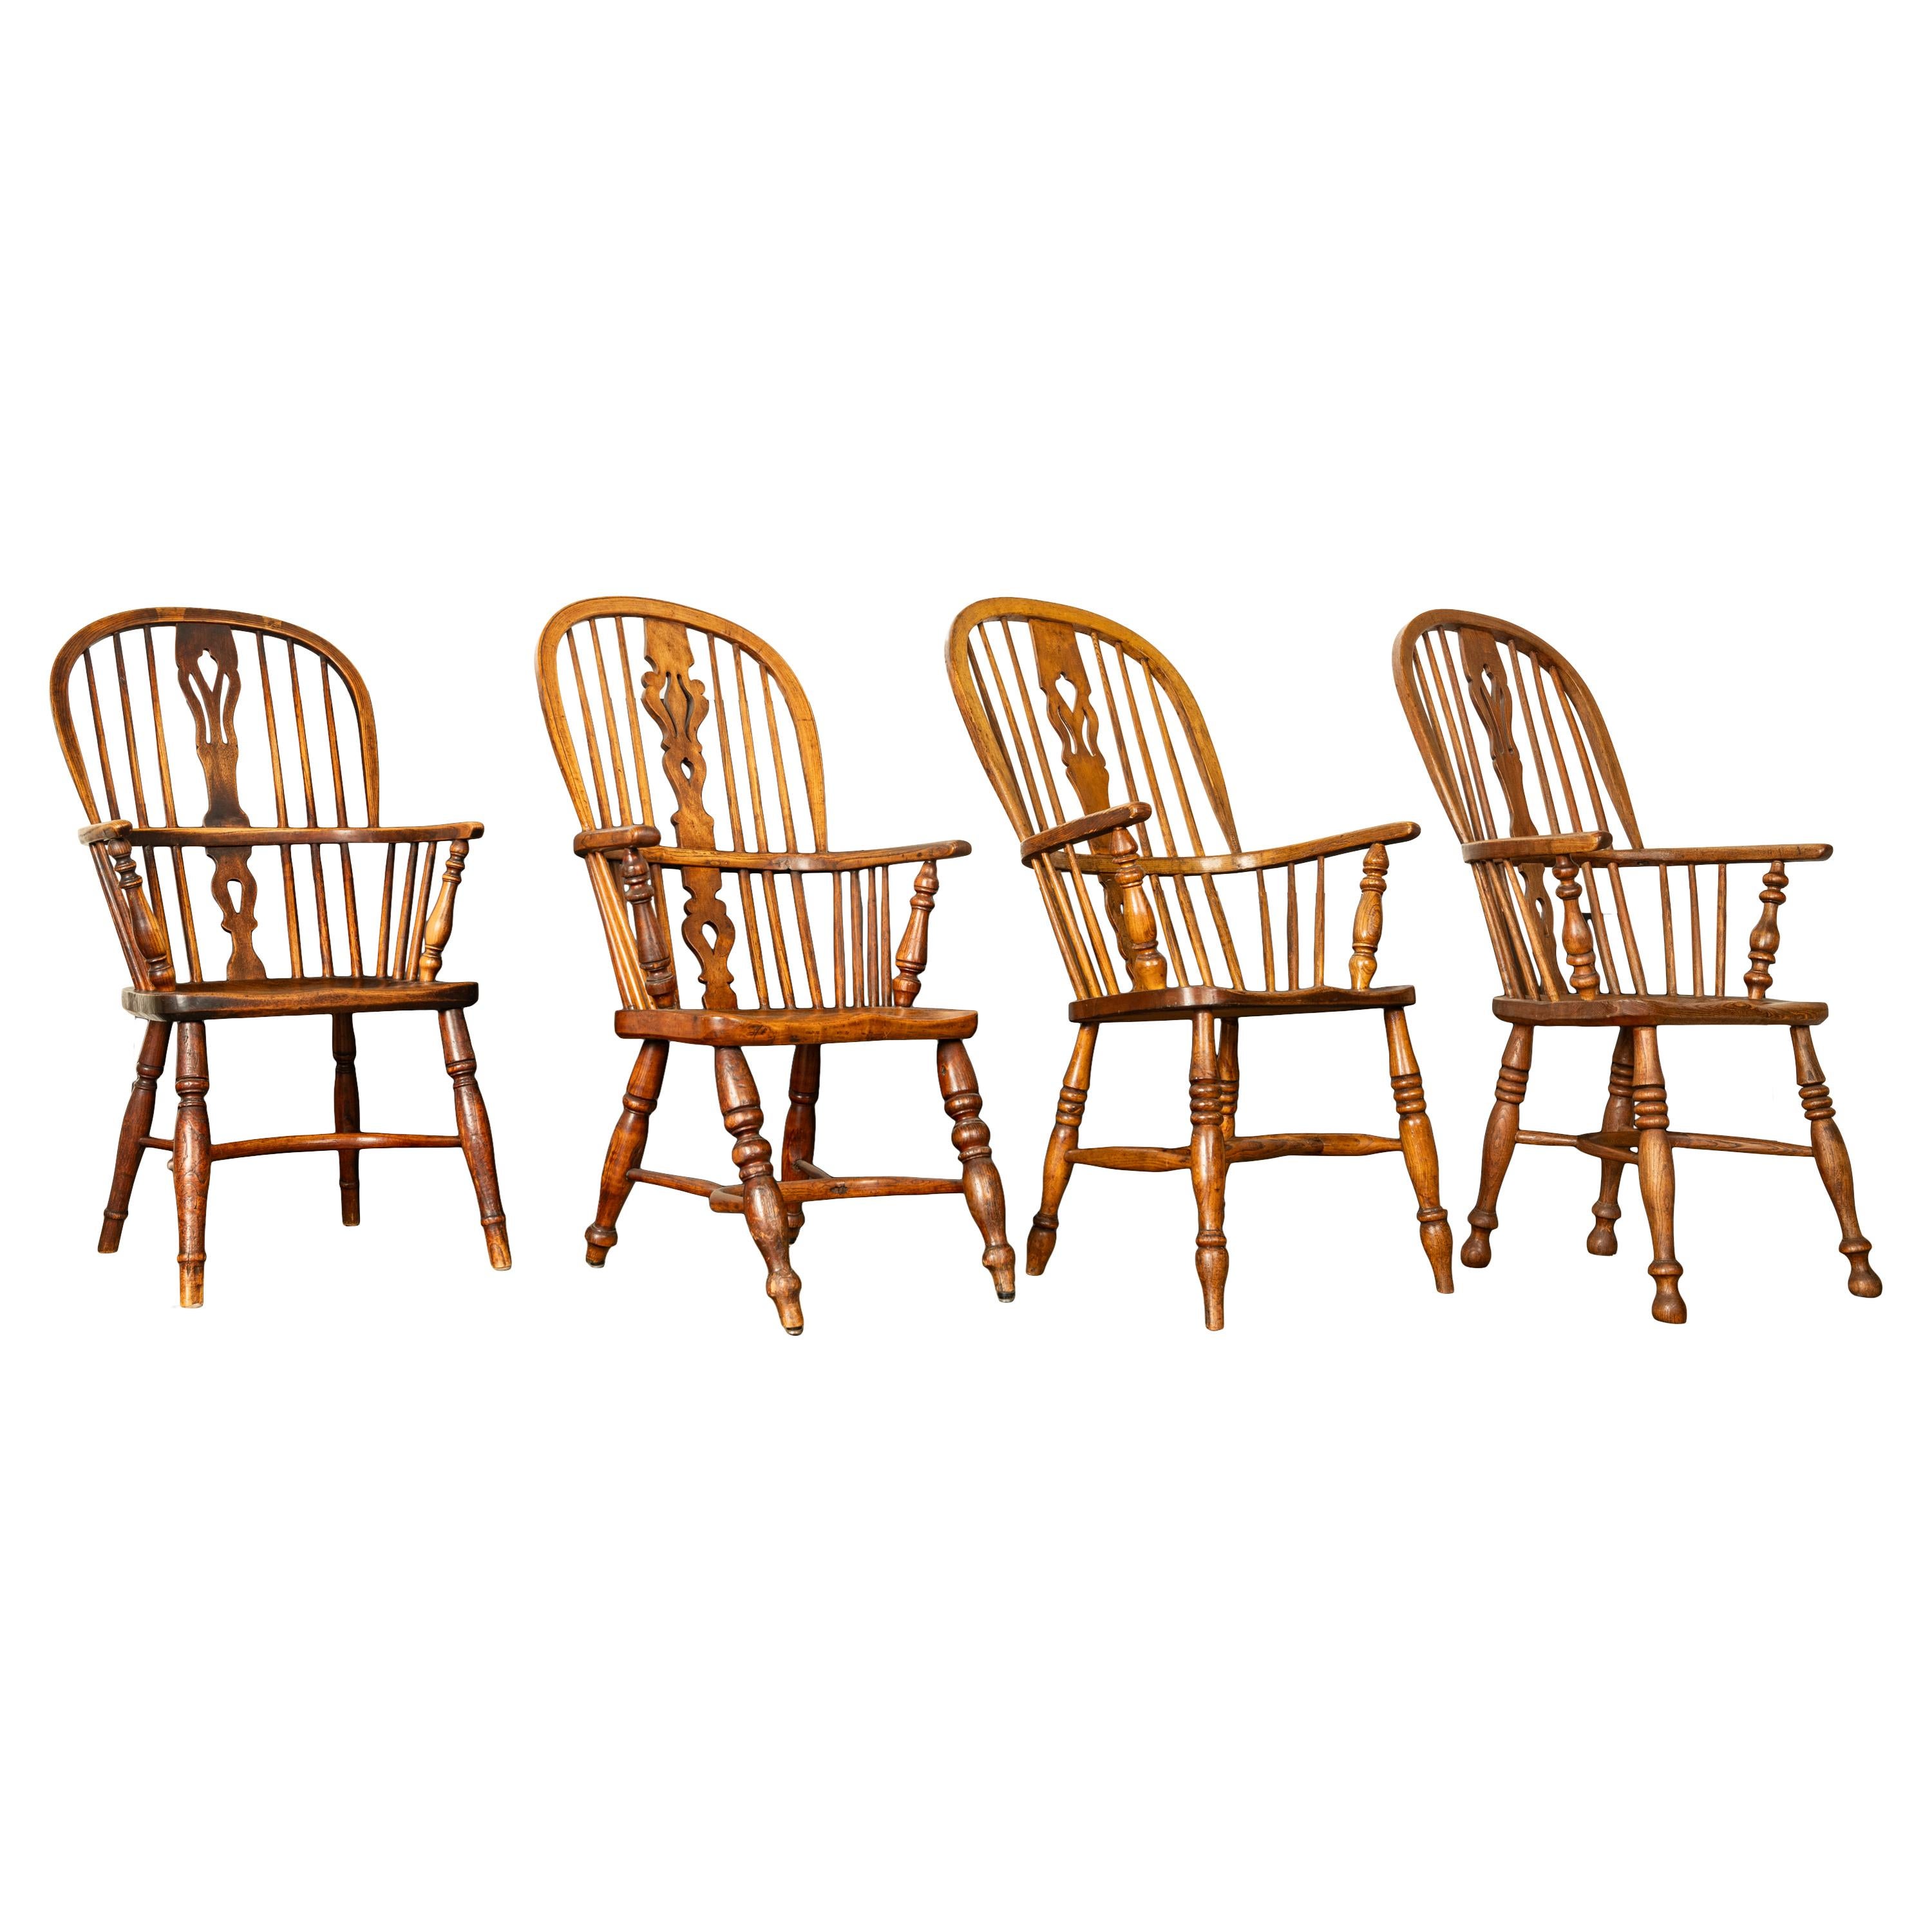 Set 4 Antique 19thC High-backed English Ash Elm Country Windsor Arm Chairs 1840  For Sale 11